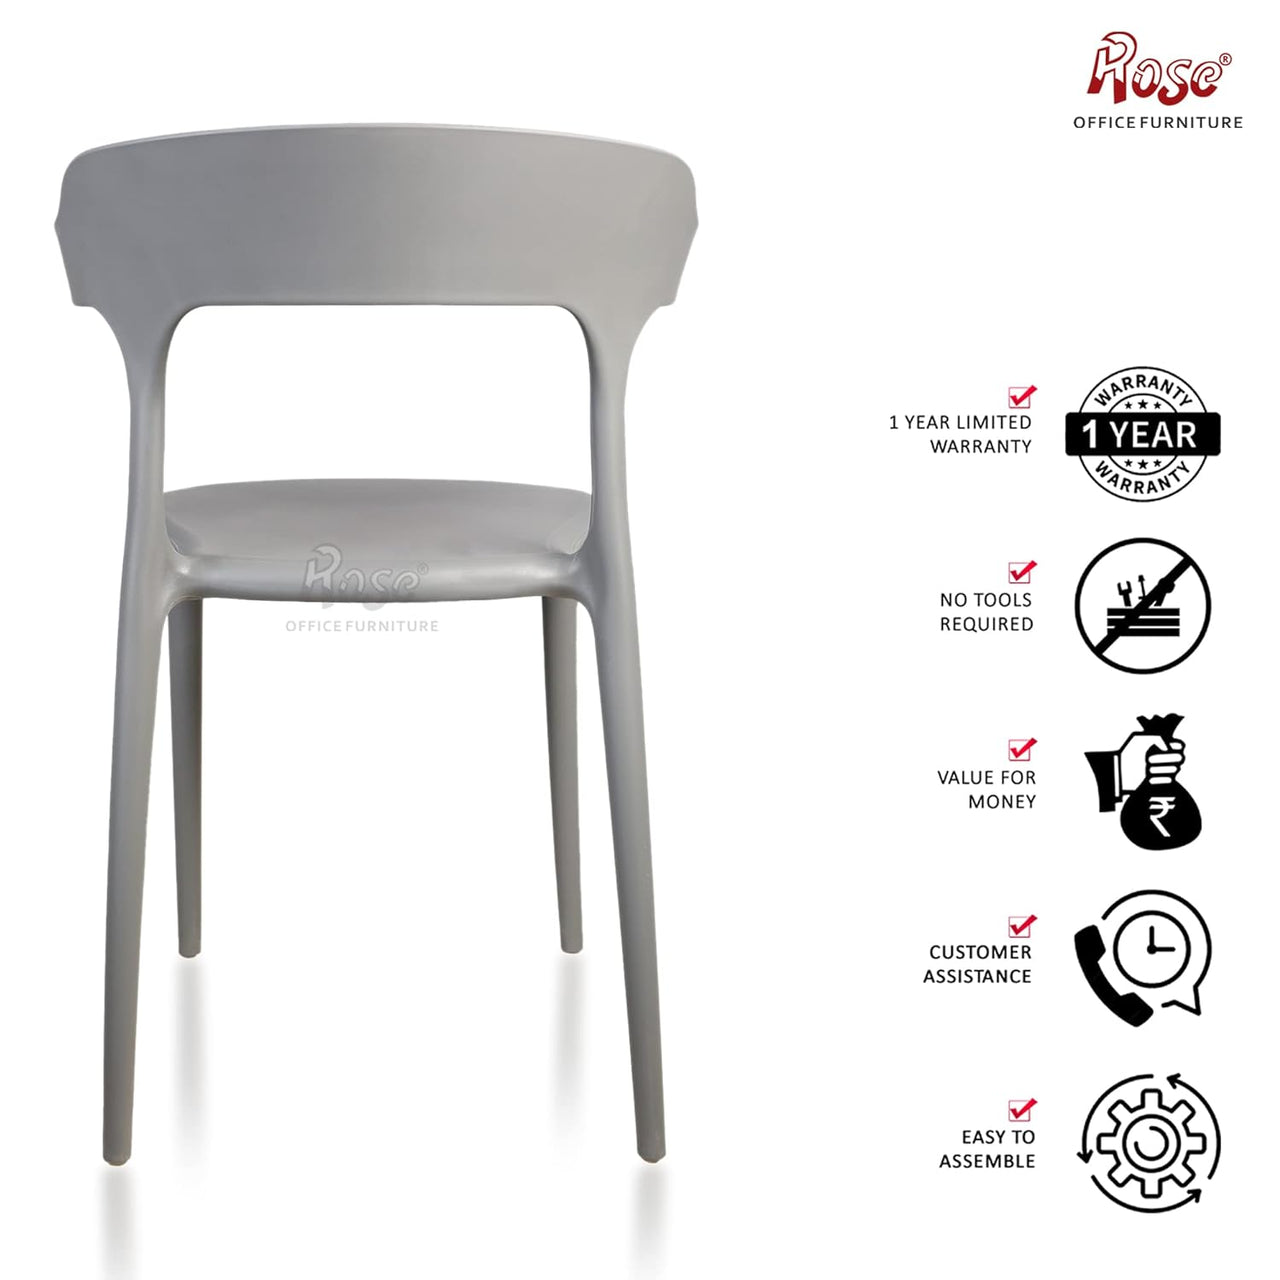 Vision Cafe Plastic Chairs | Restaurant Chair with Backrest (Grey)